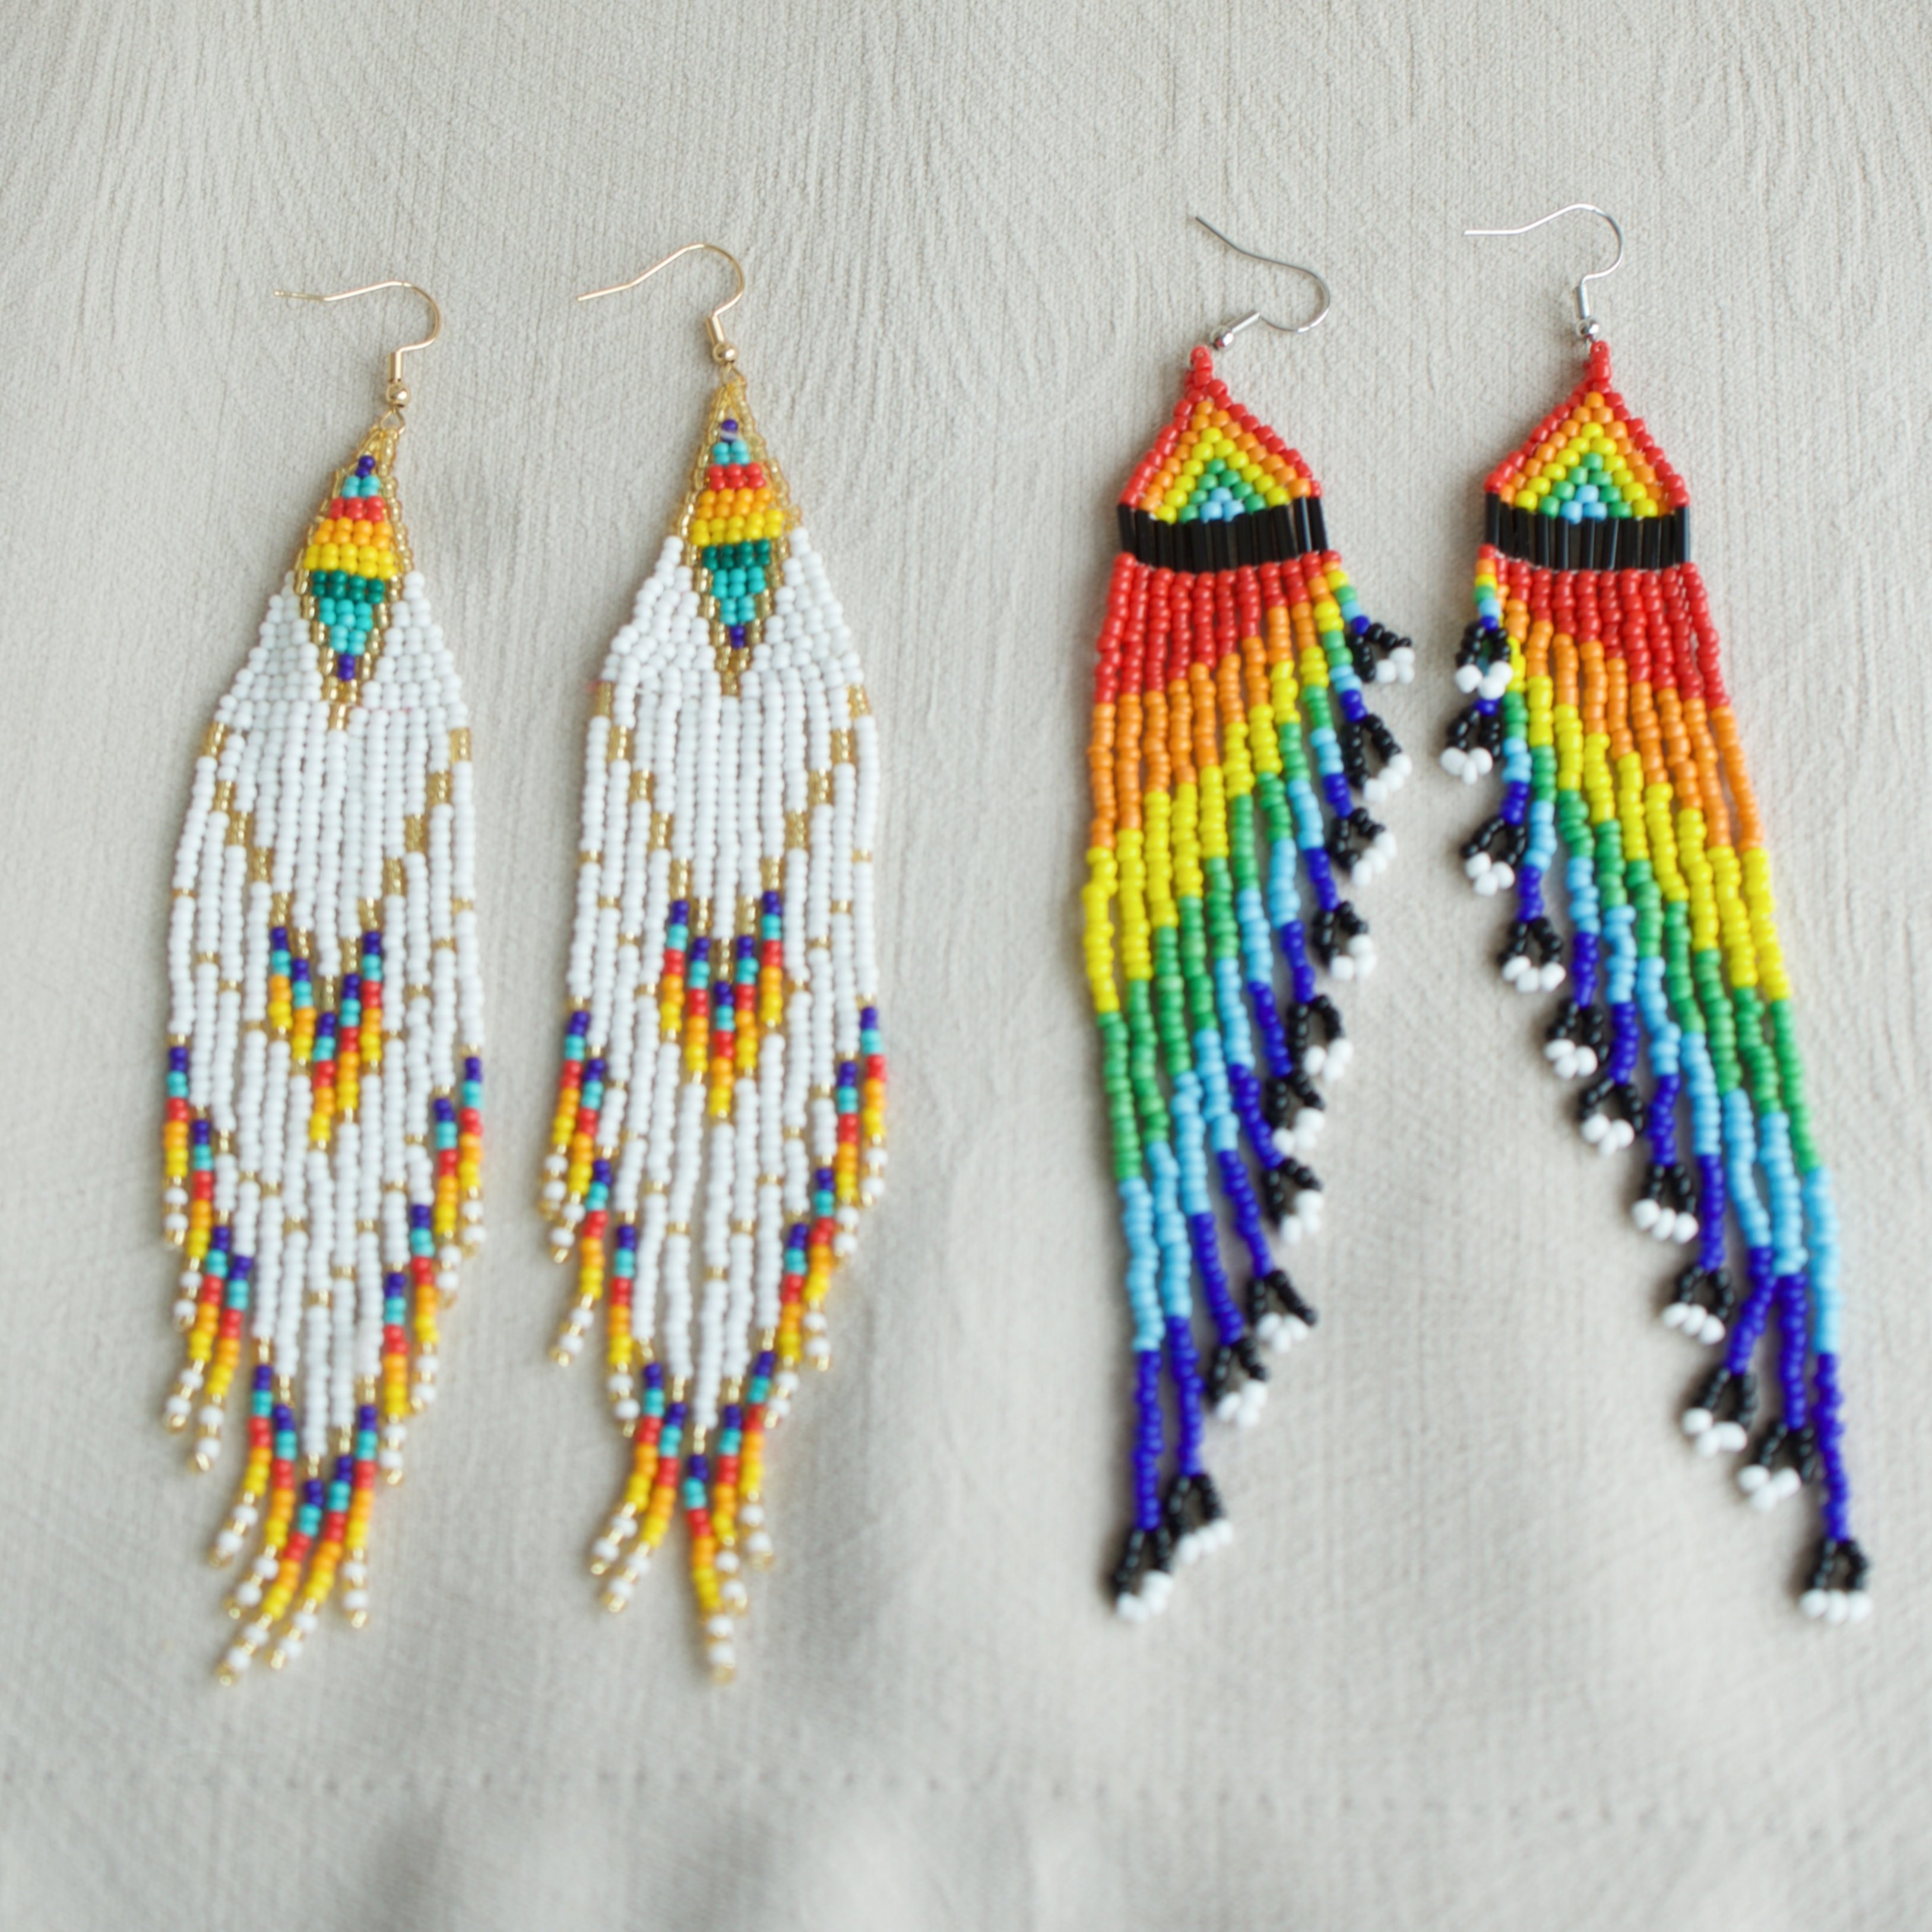 

Boho-chic Handcrafted Beaded Dangle Earrings - 2pc Set, Rainbow Color Block Design With Stainless Steel Hooks For Everyday & Vacation Wear